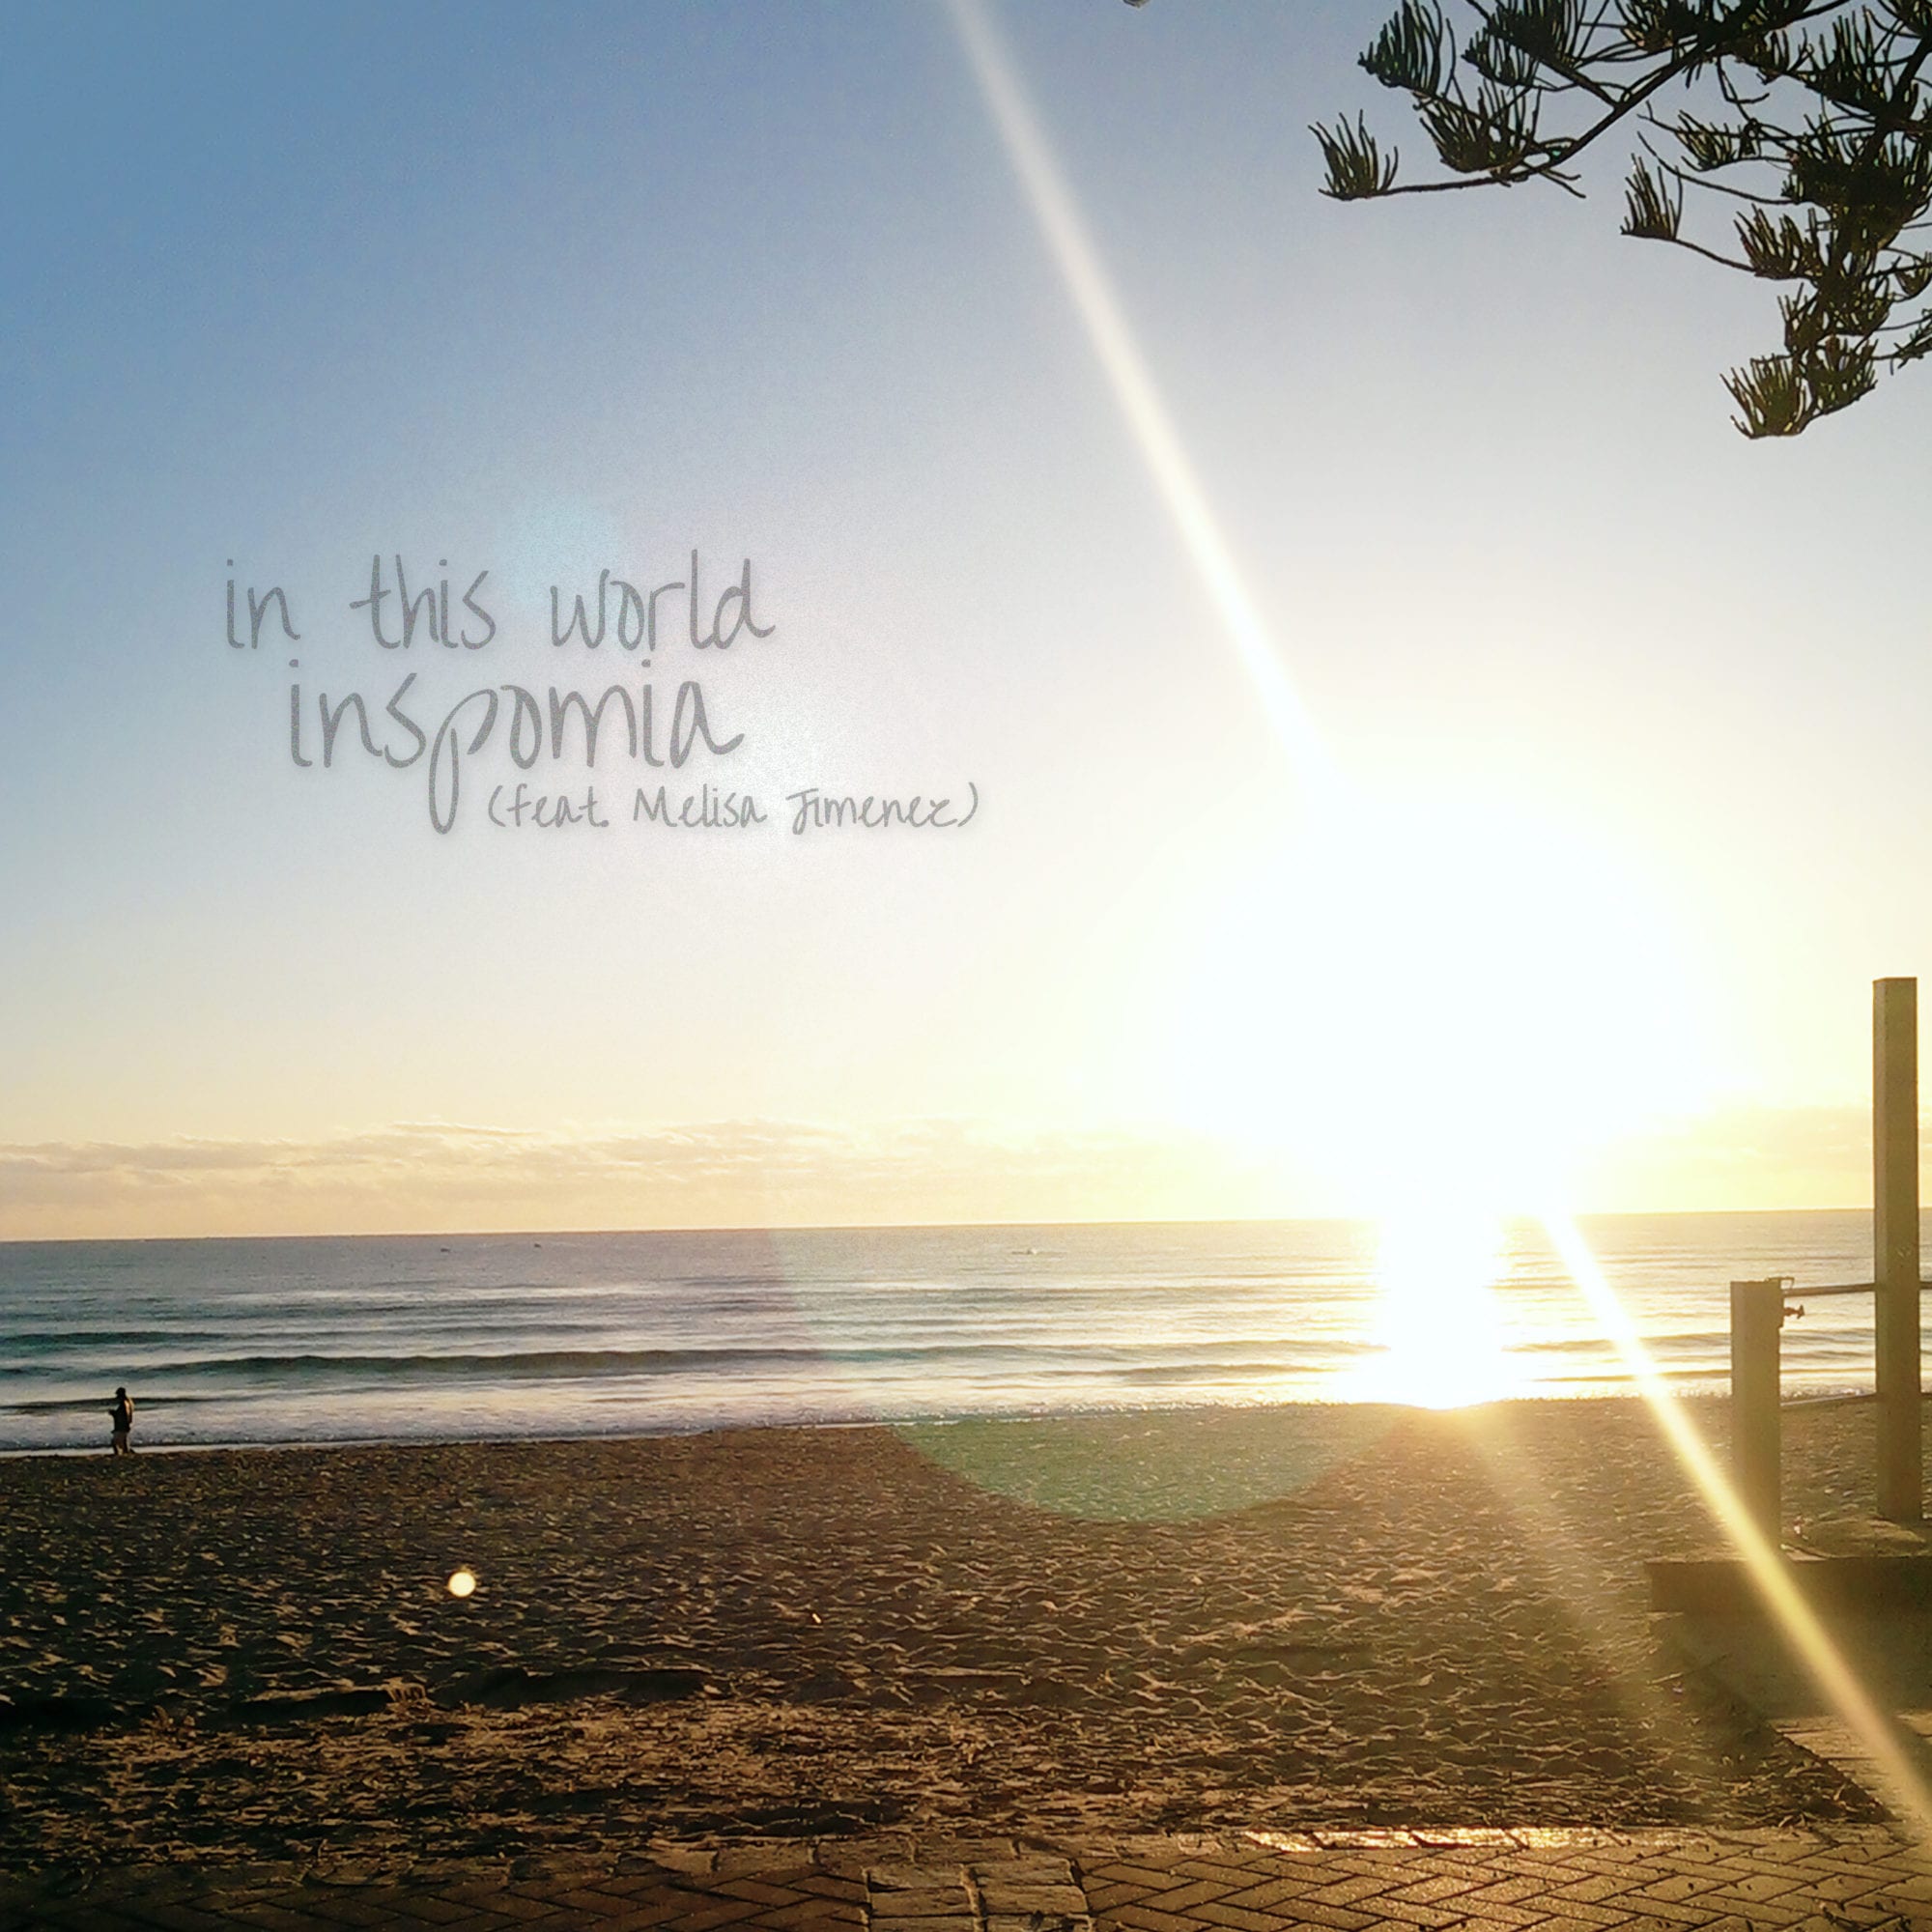 Cover art for song 'In This World' by artist Inspomia depicting an Image of a beautiful beach and rising sun off the horizon